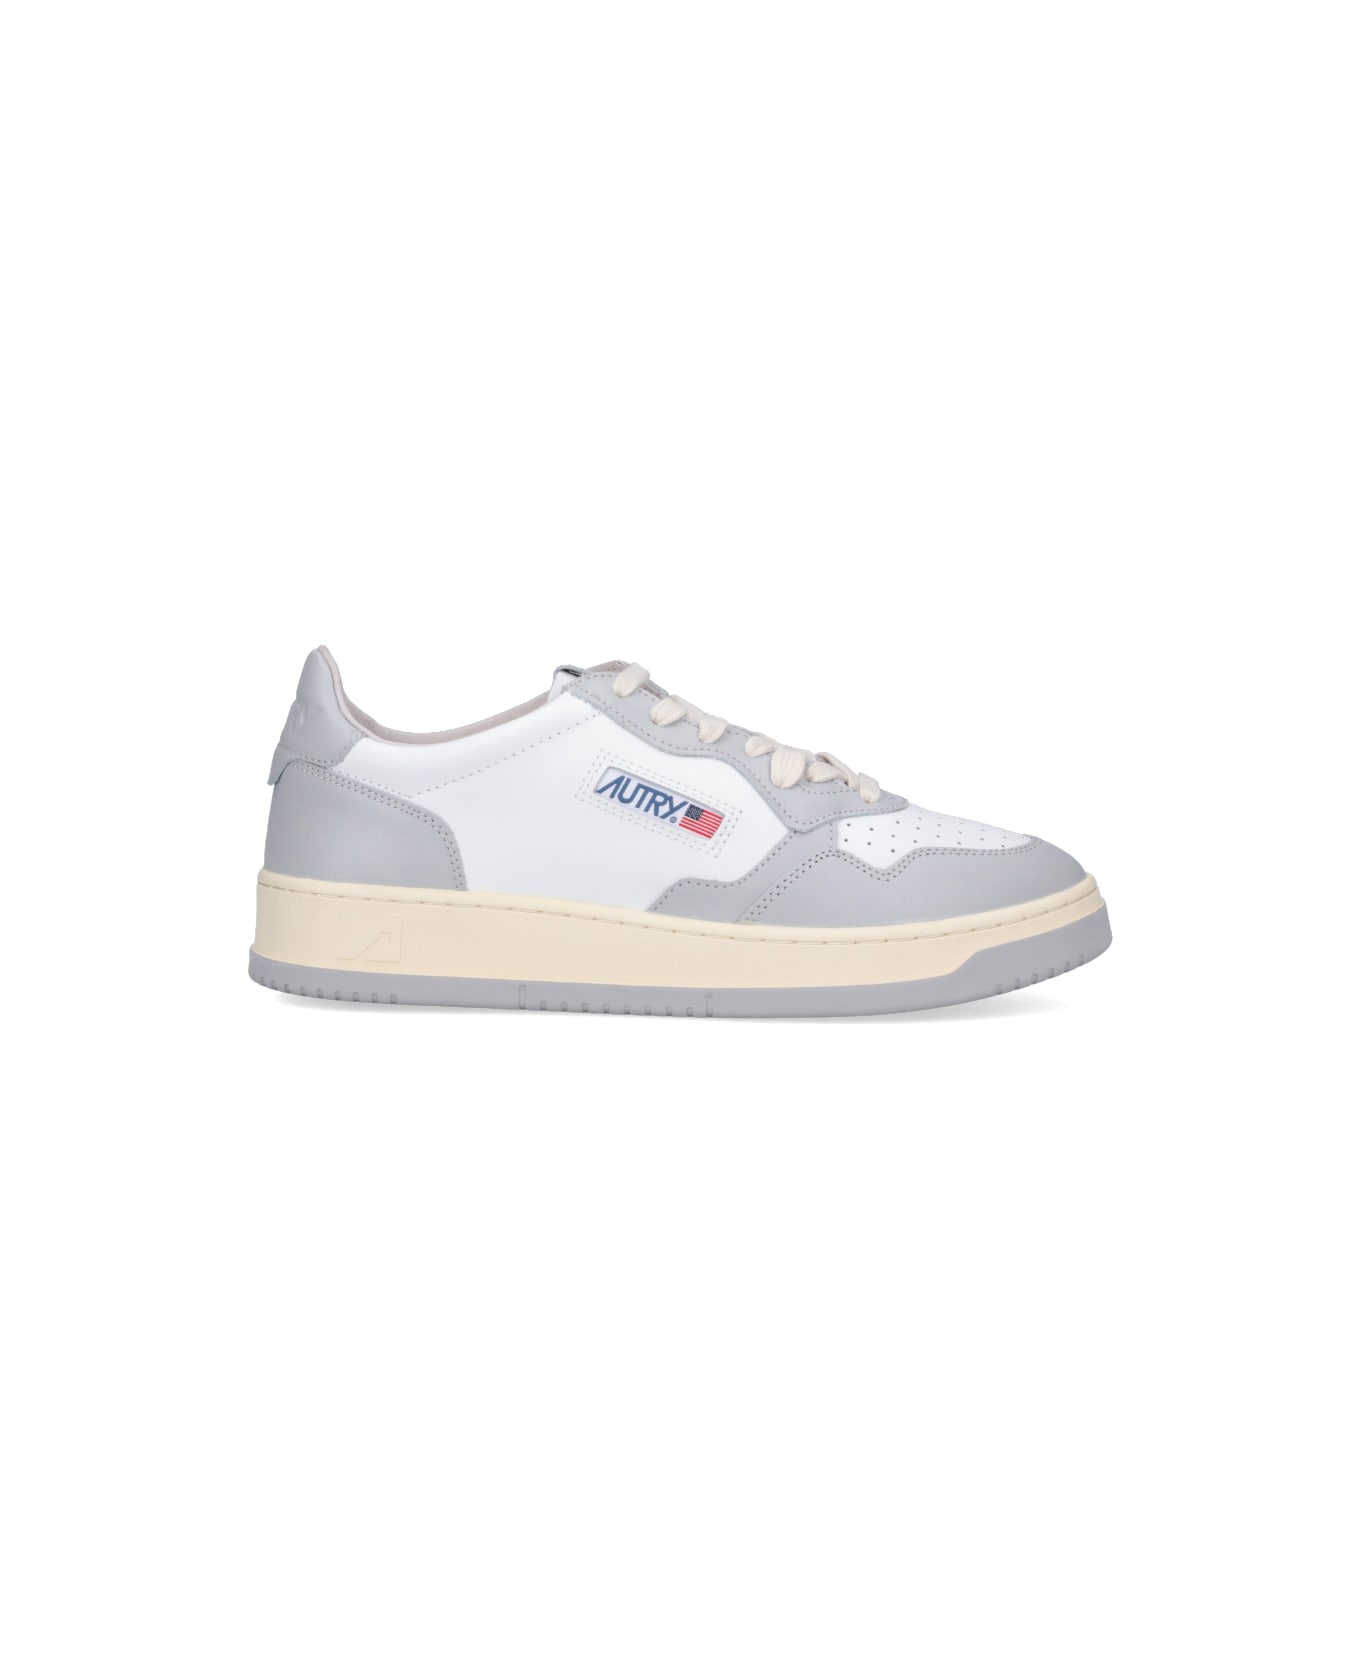 Autry Grey And White Two-tone Leather Medalist Low Sneakers - White/grey スニーカー